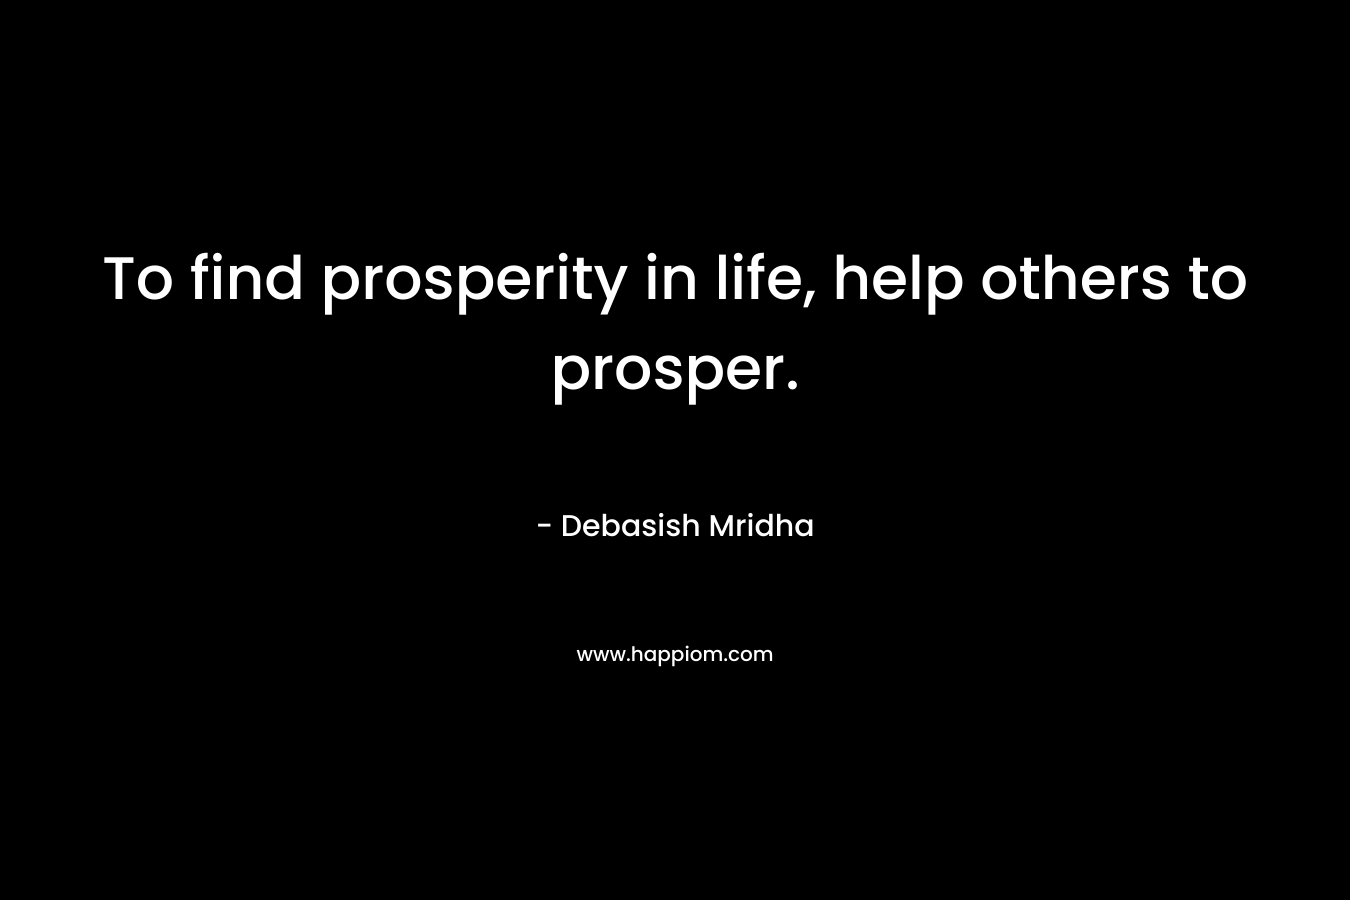 To find prosperity in life, help others to prosper.